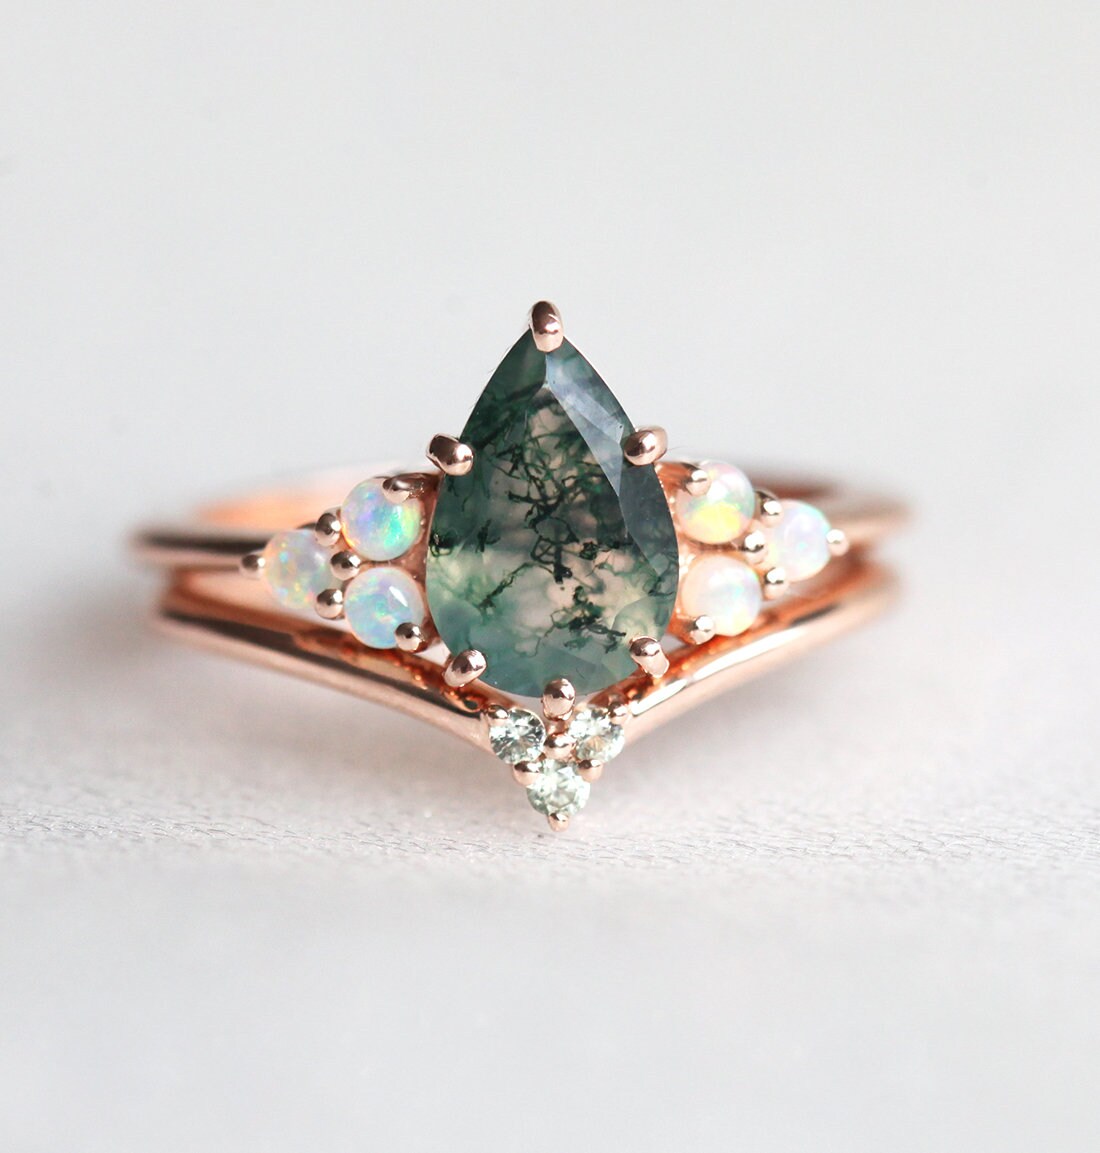 Willow Pear Moss Agate and Opal Ring Set